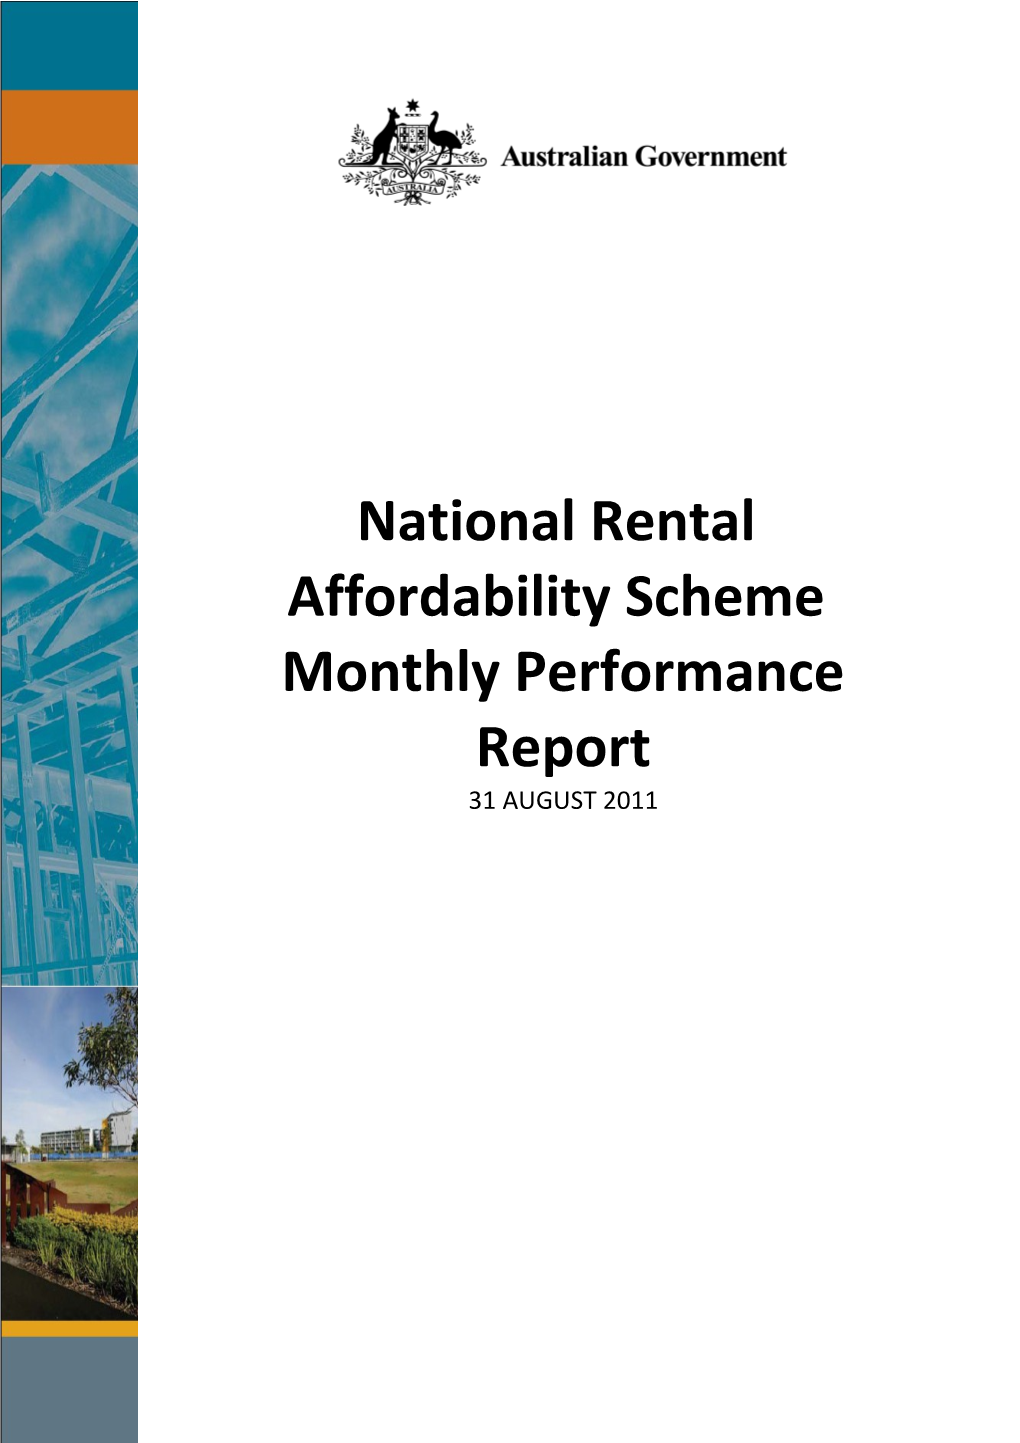 National Rental Affordability Scheme Performance Report August 2011